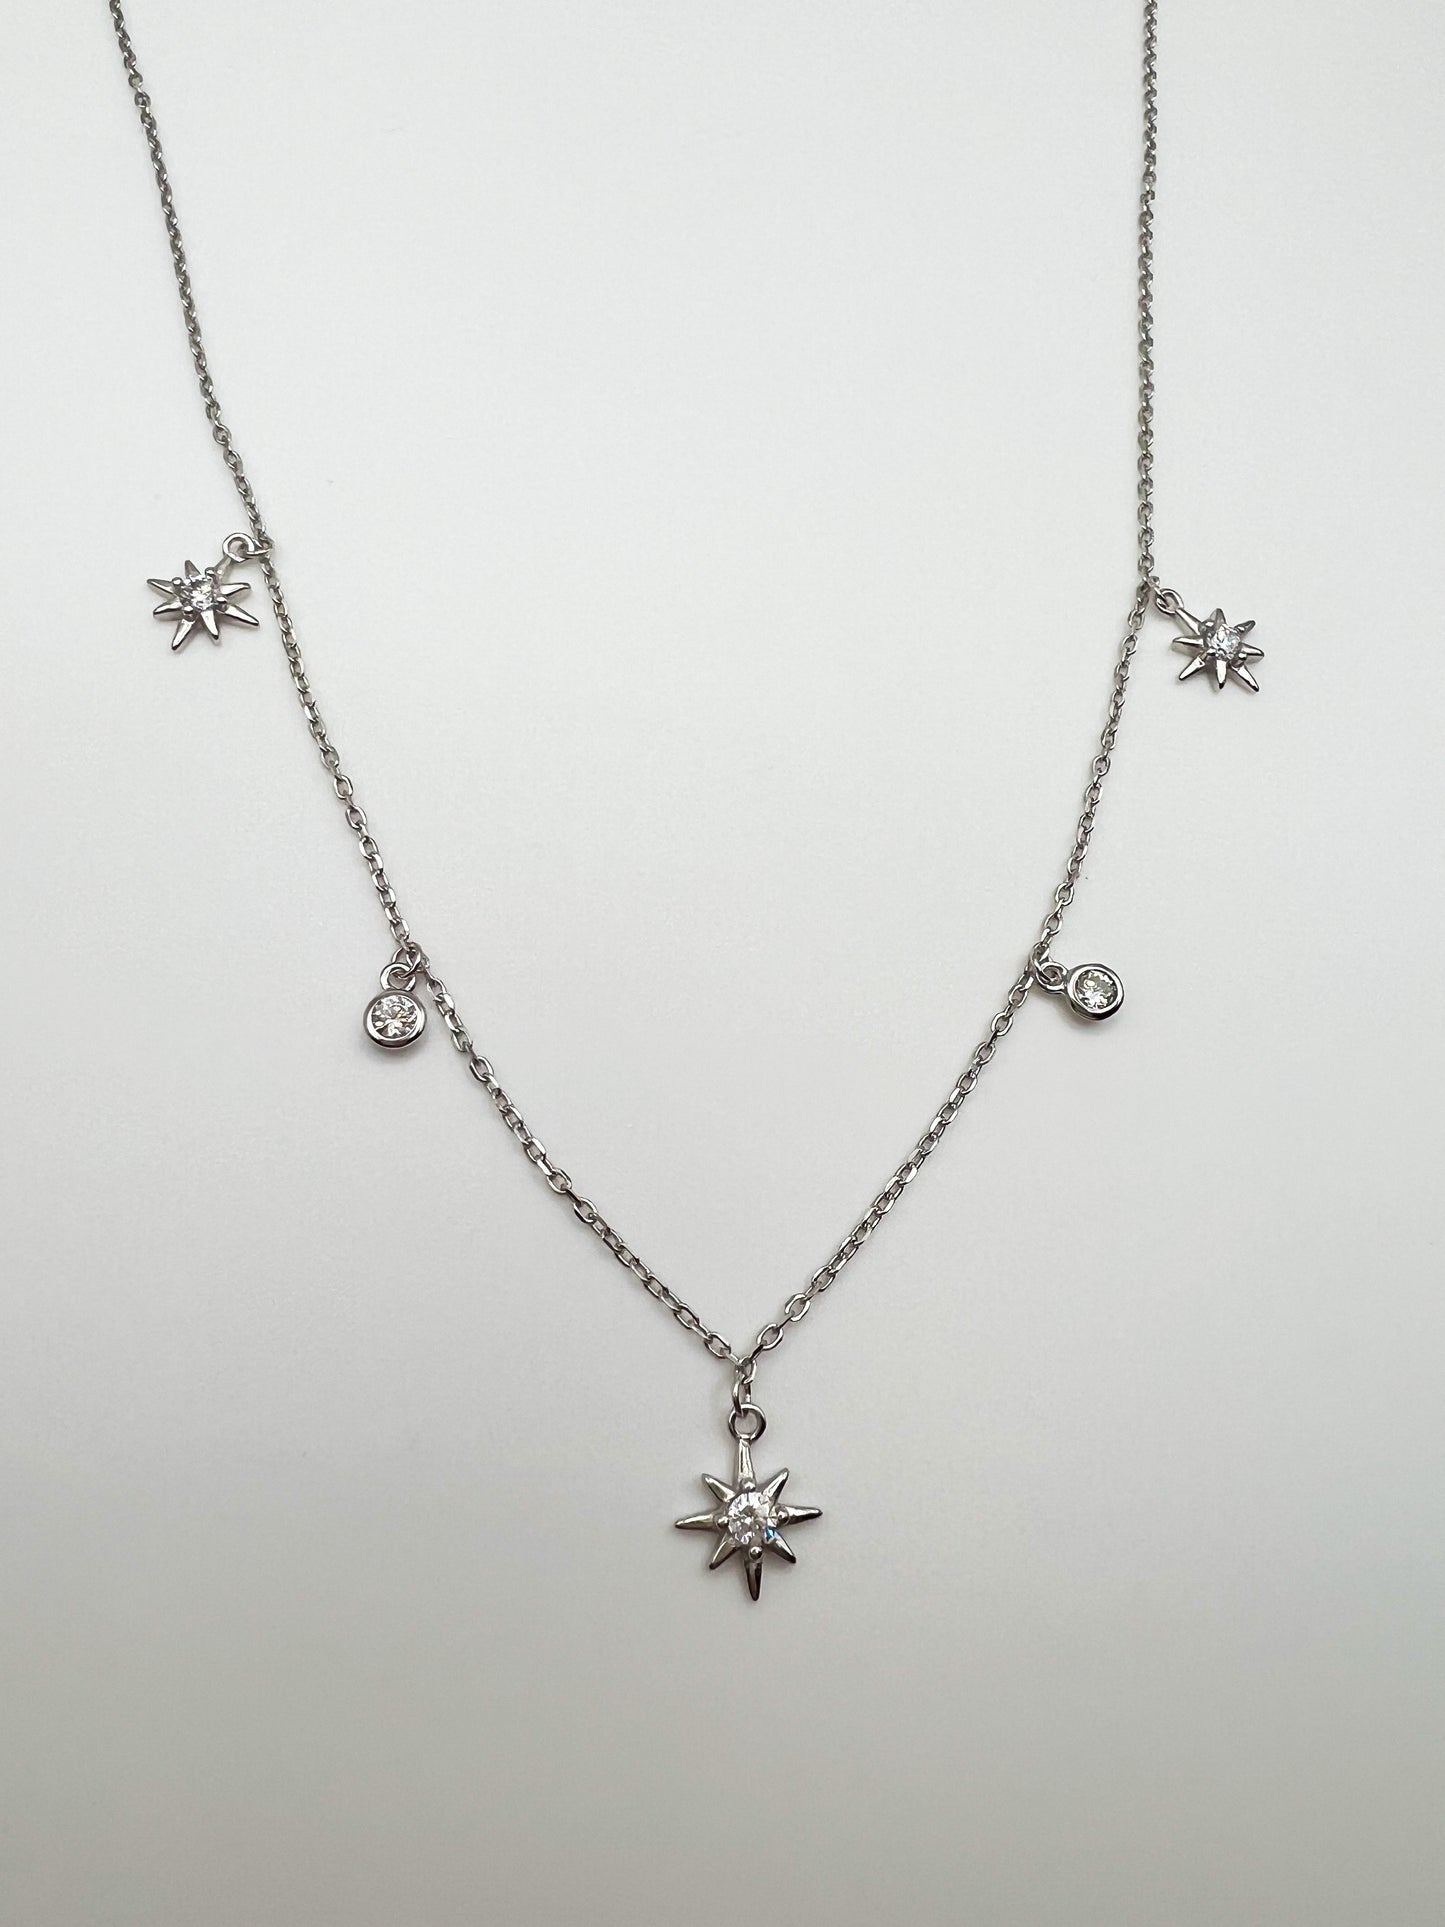 3-Wishes Necklace